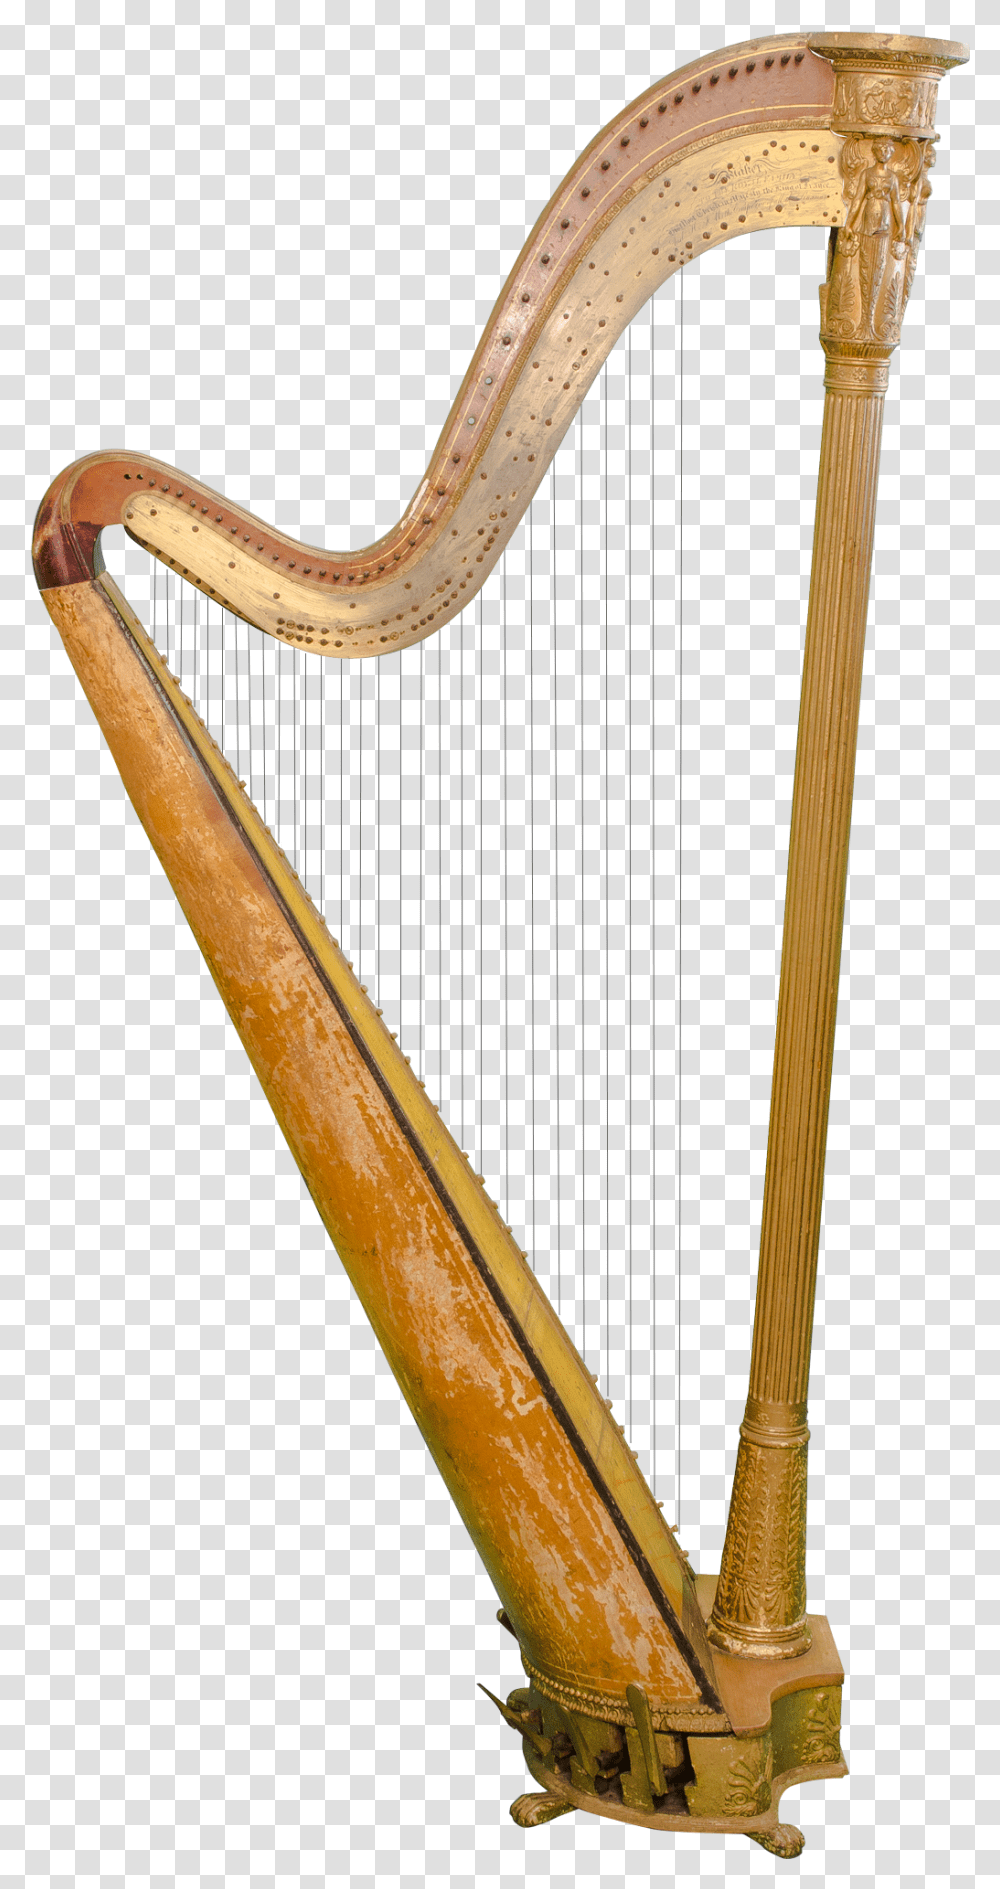 Harp Images Free Download Musical Instruments Celtic Harp, Axe, Tool, Hammer, Wood Transparent Png